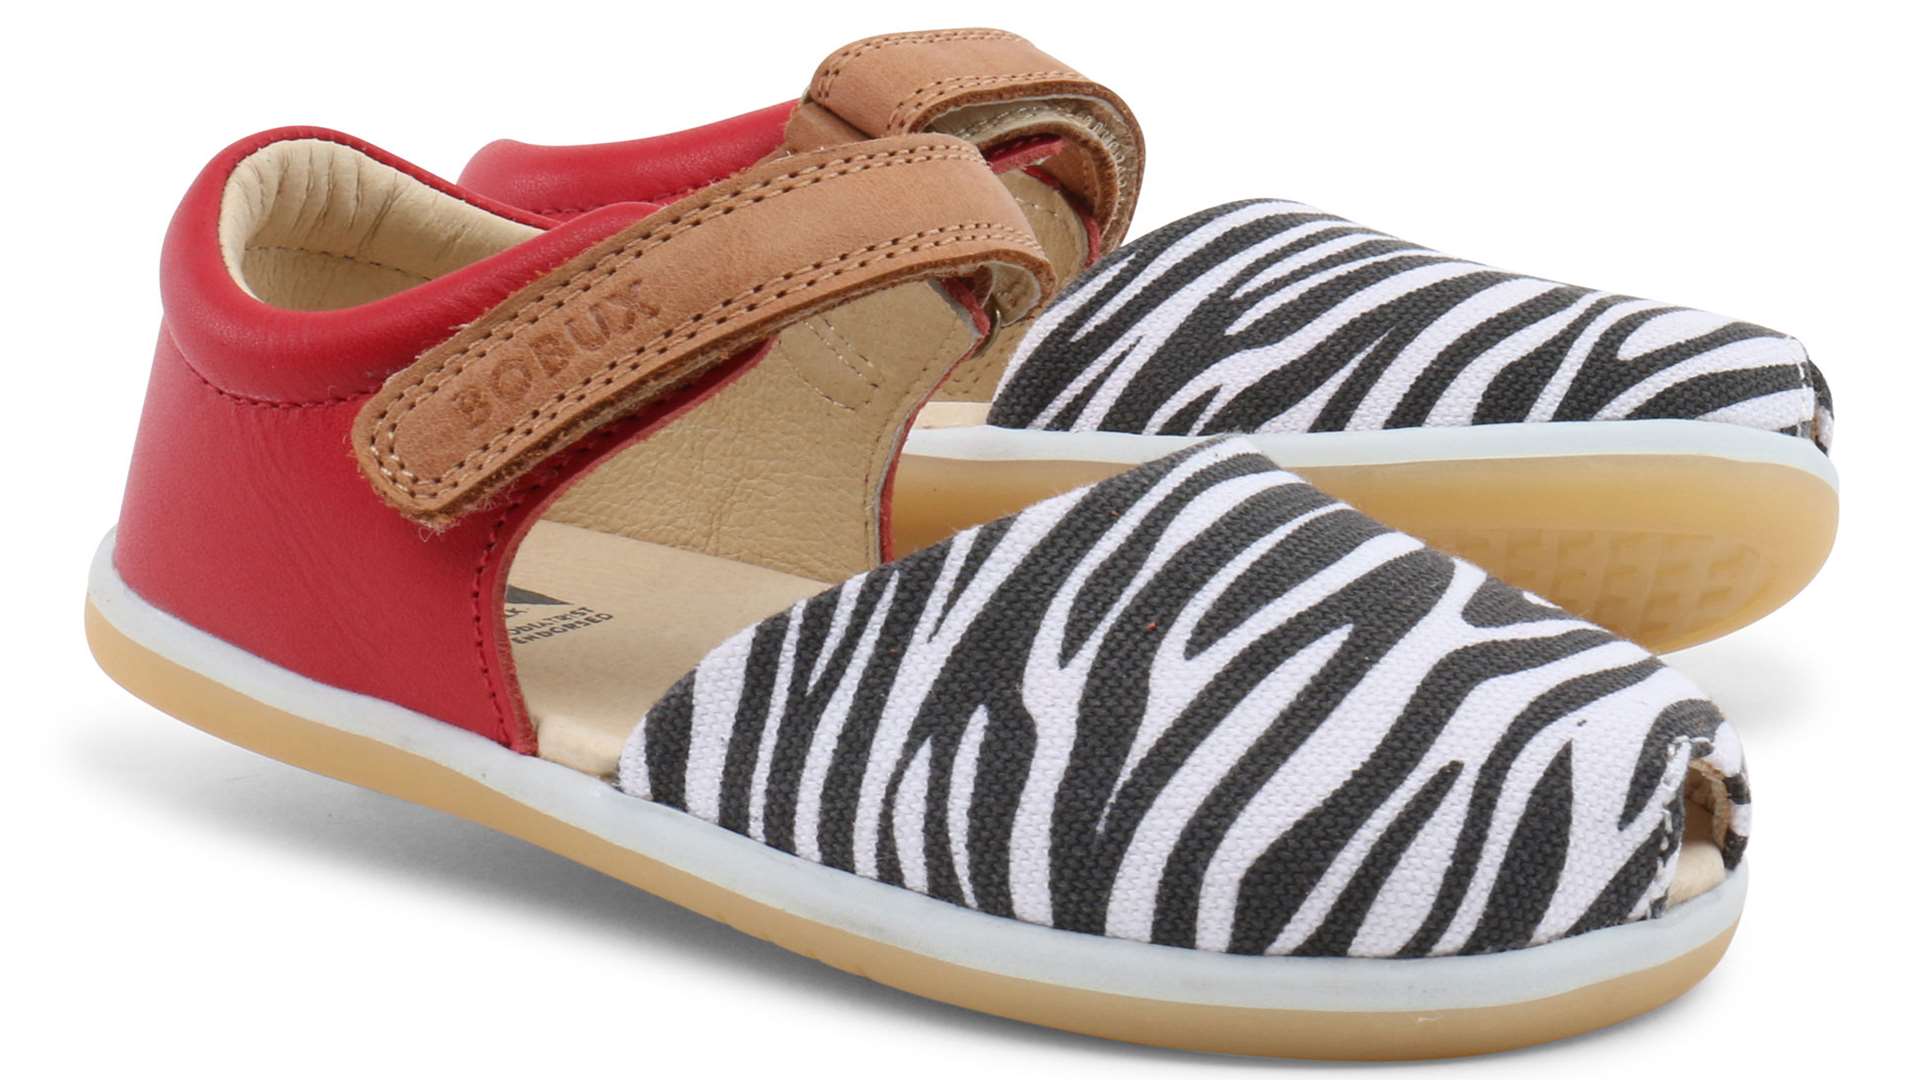 Step out in style with these Bobux Twist sandals in Red With Zebra, available in sizes 22-26, from £45 (www.bobux.co.uk)